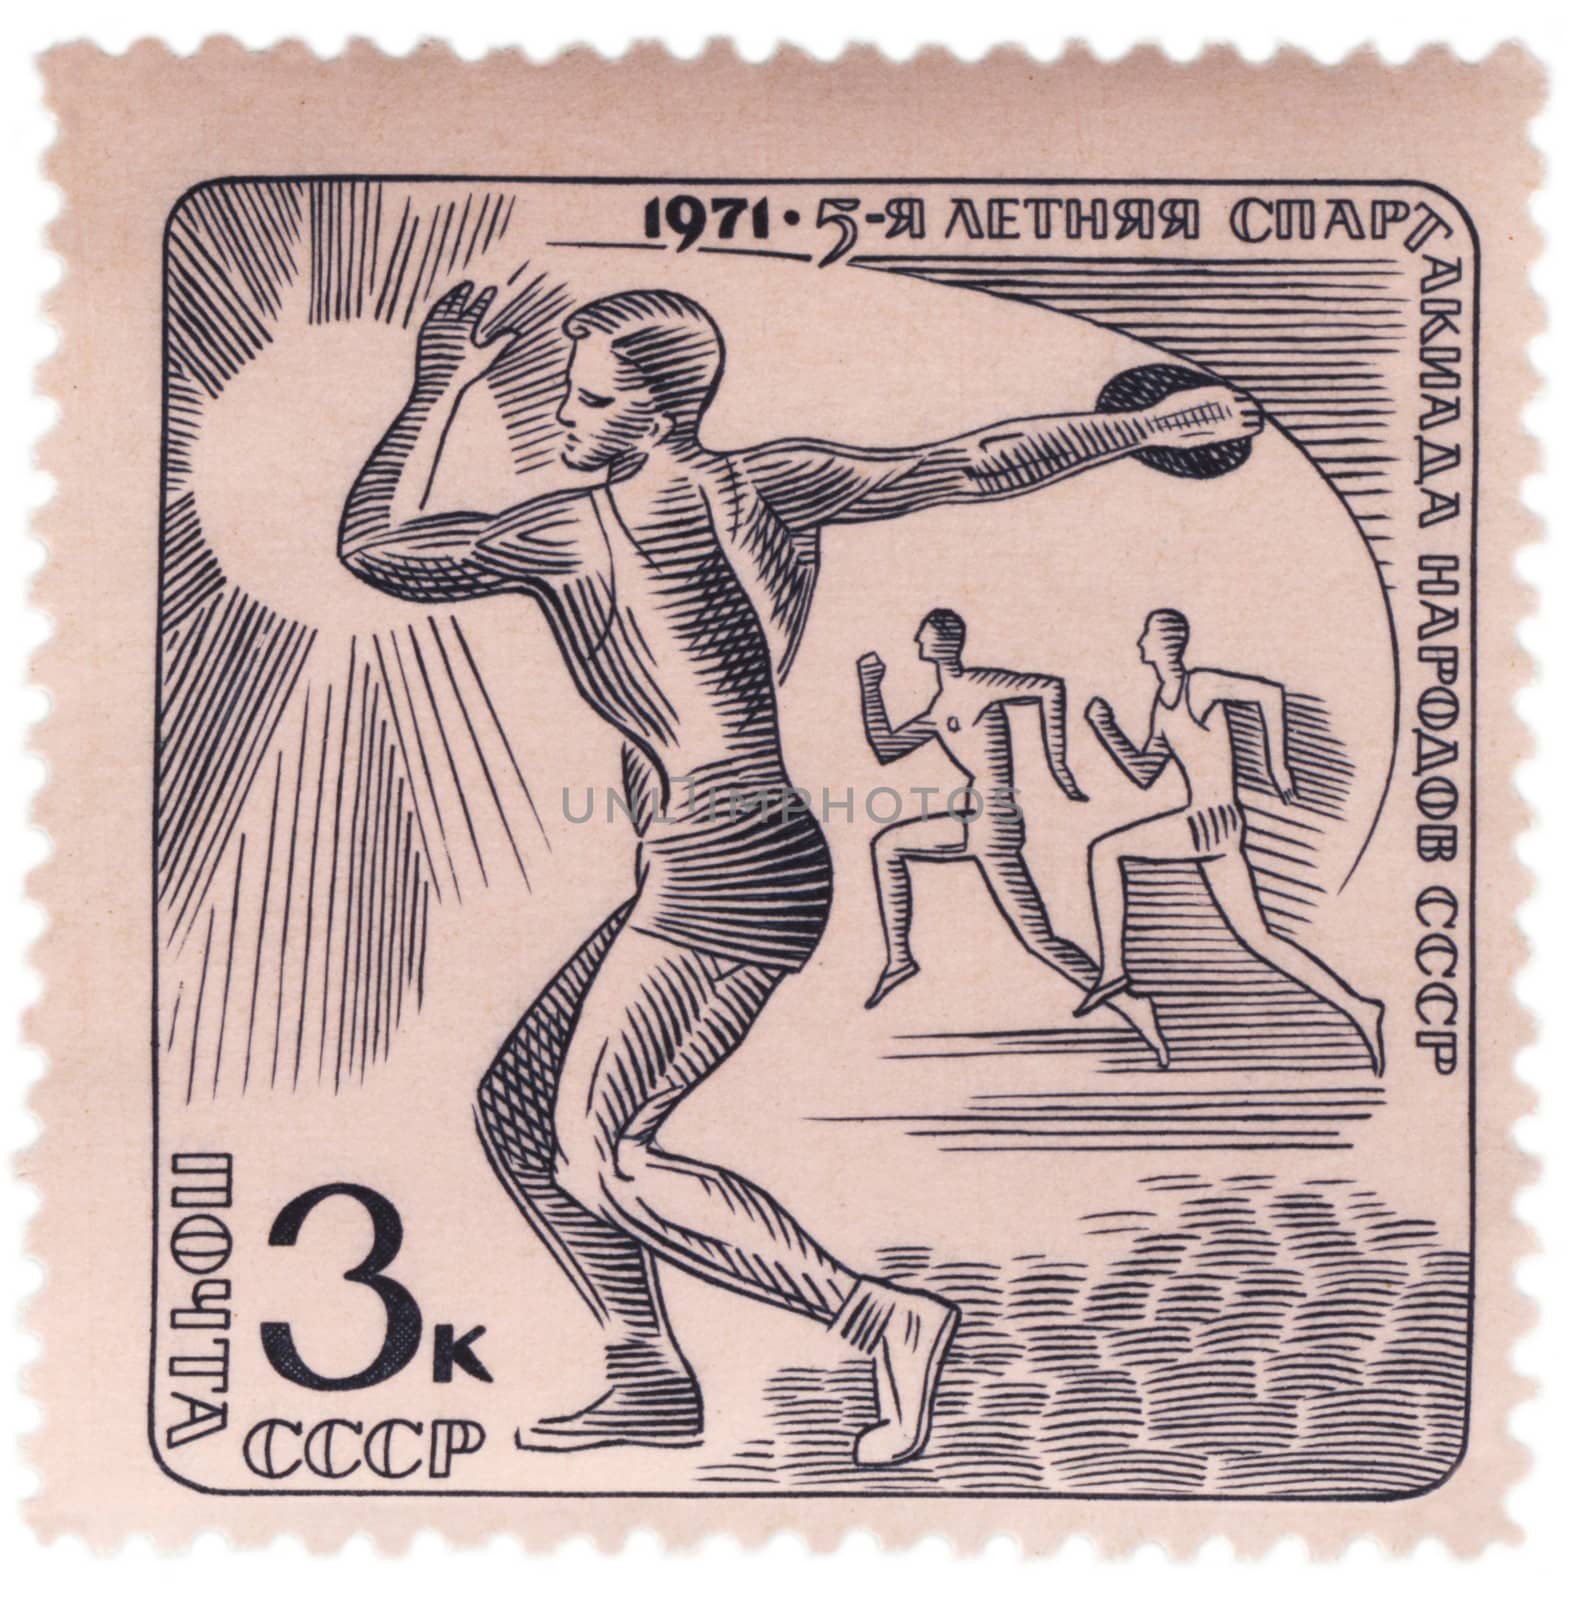 Discus thrower on post stamp by wander